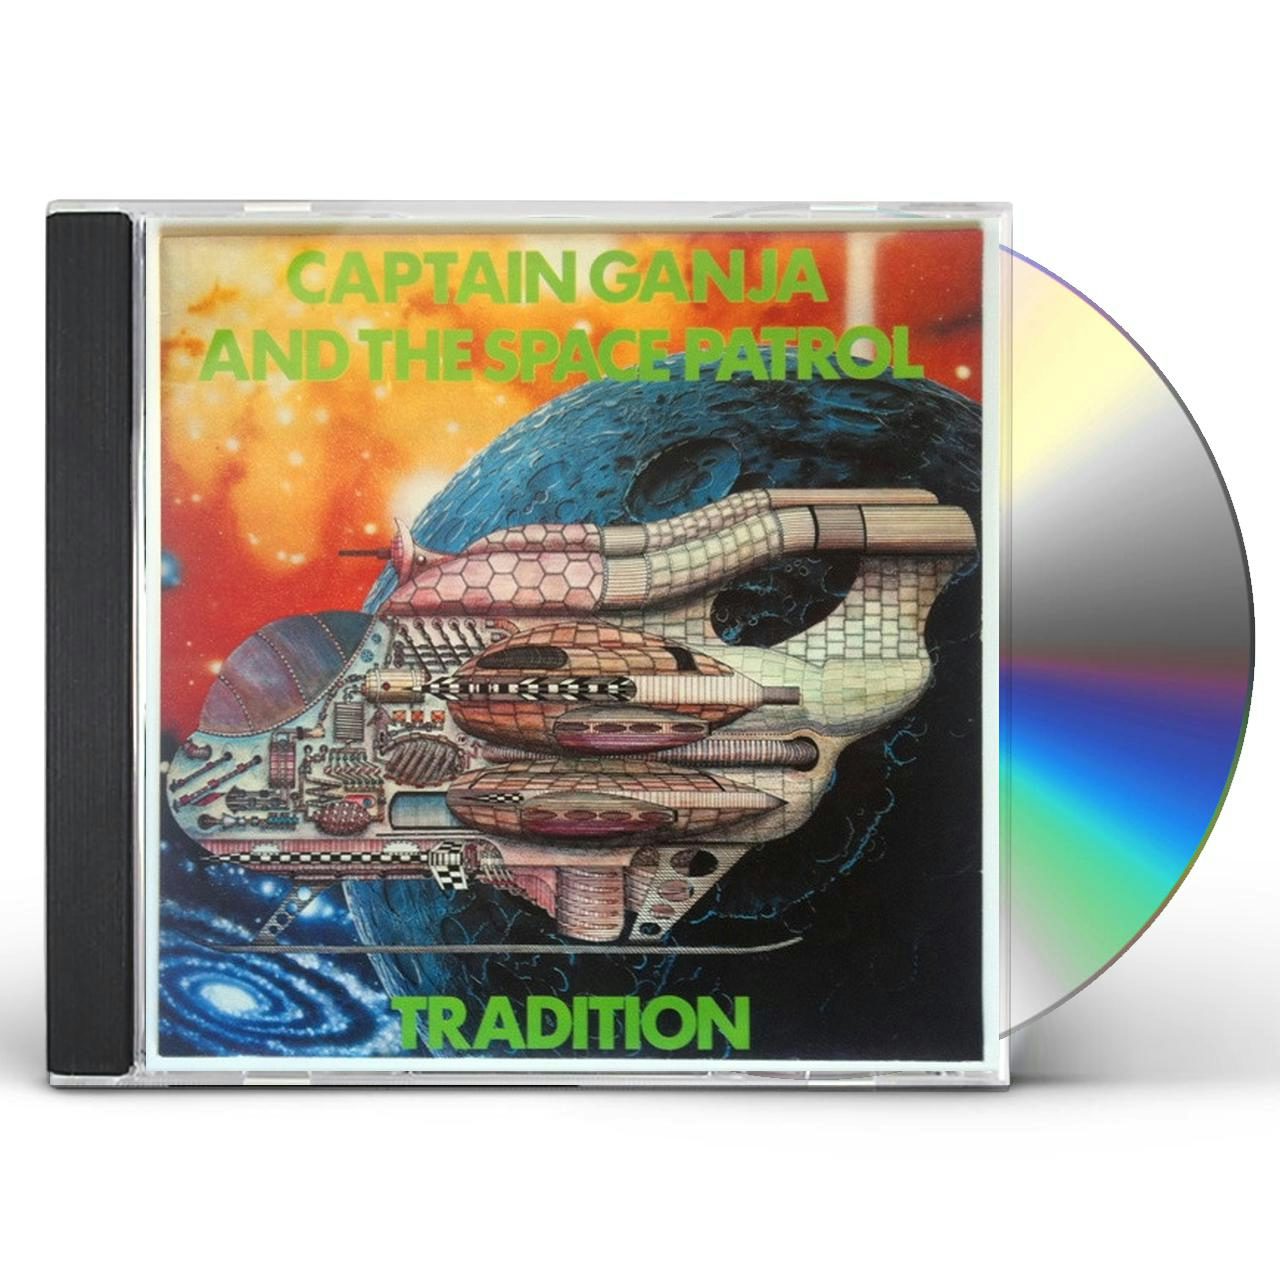 Tradition CAPTAIN GANJA & THE SPACE PATROL CD